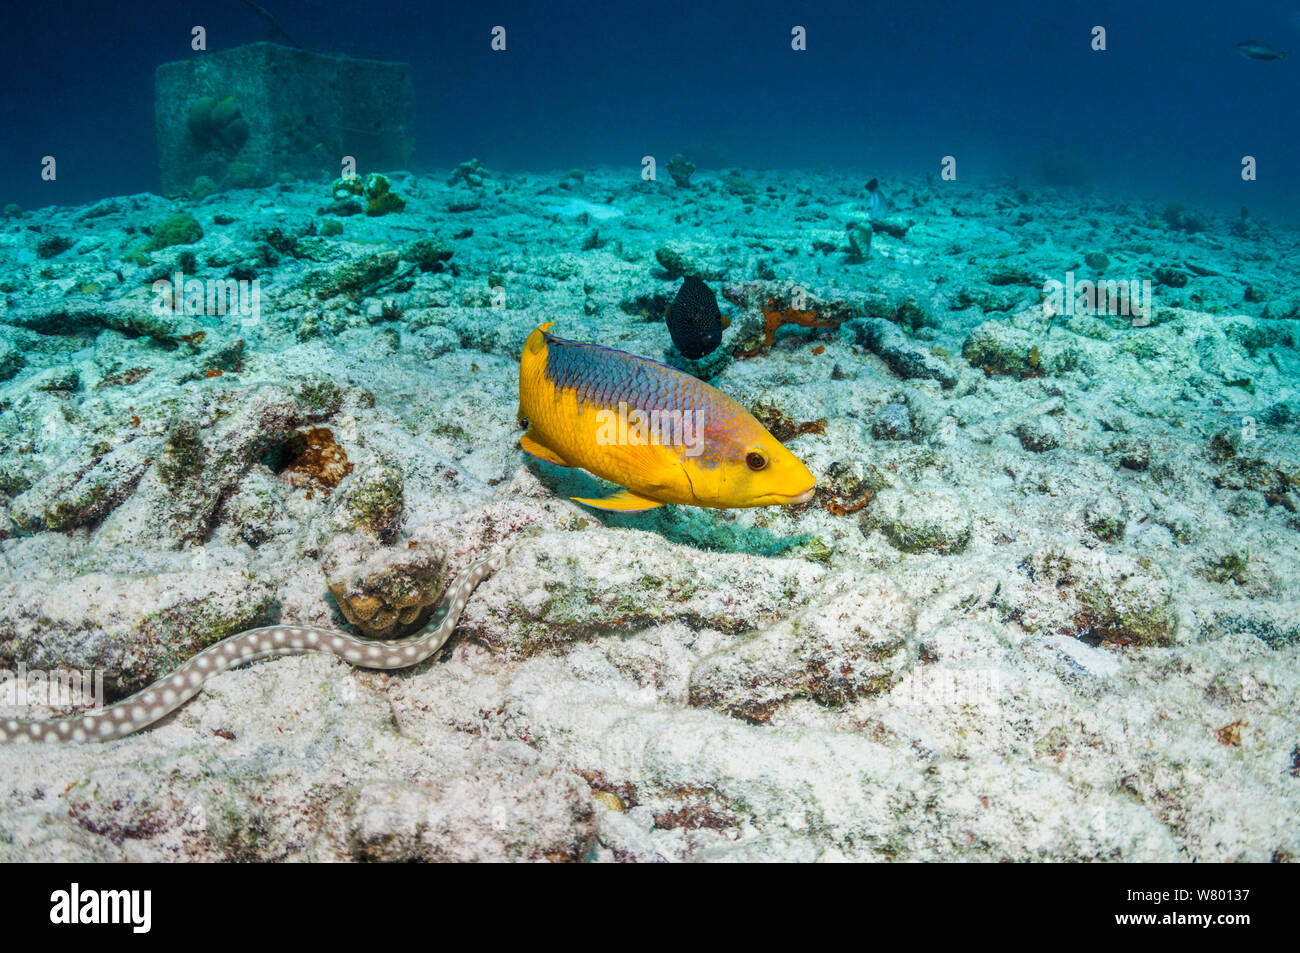 Spanish hogfish (Bodianus rufus) closely watching and following a hunting Sharptail eel (Myrichthys breviceps)  Bonaire, Netherlands Antilles, Caribbean, Atlantic Ocean. Stock Photo